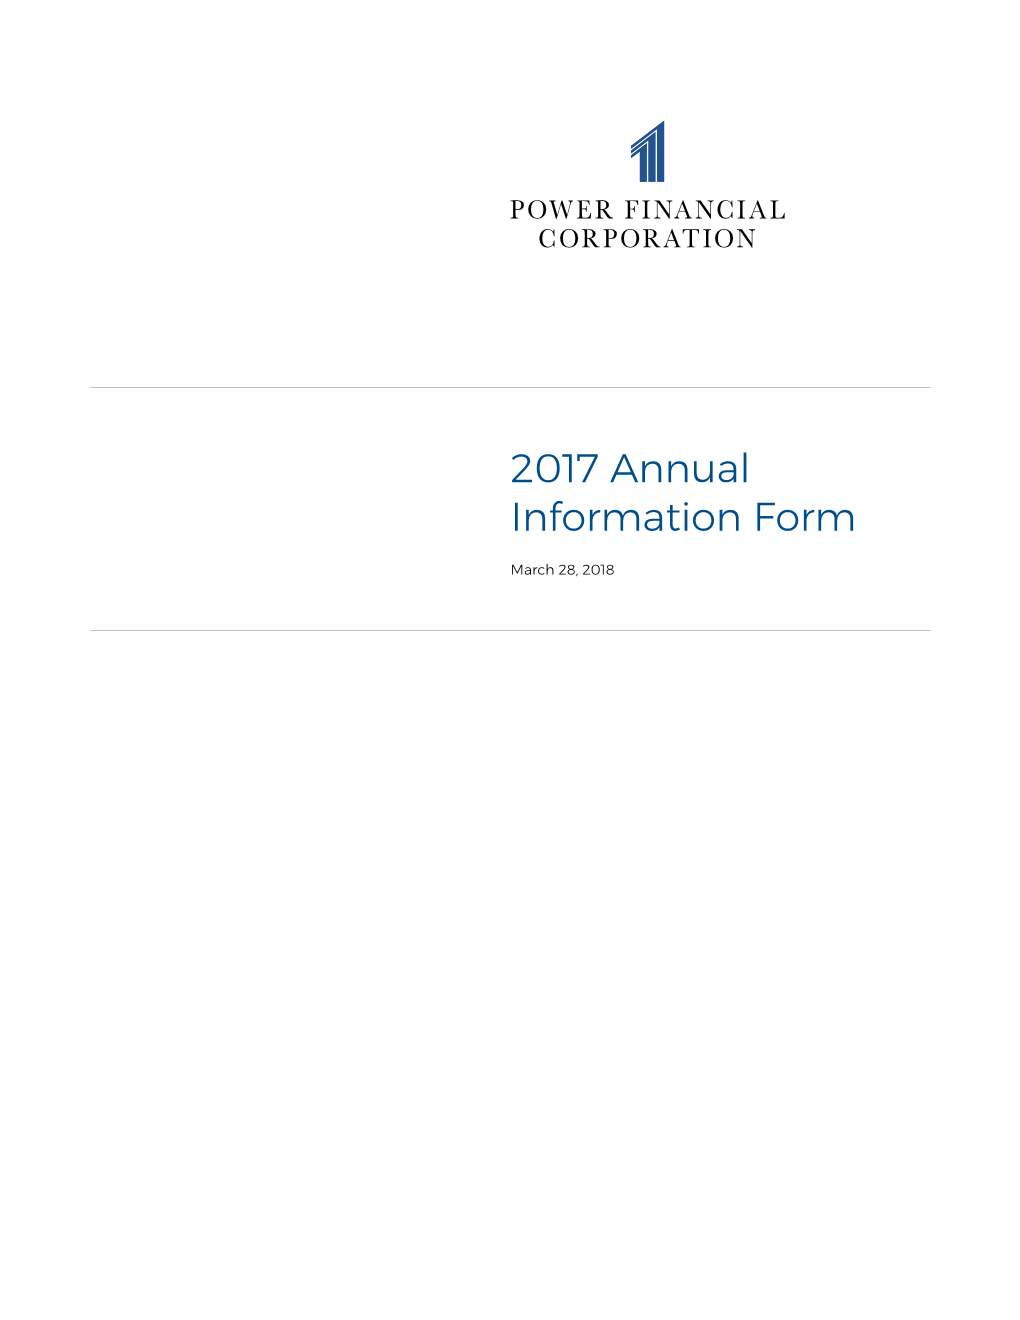 2017 Annual Information Form